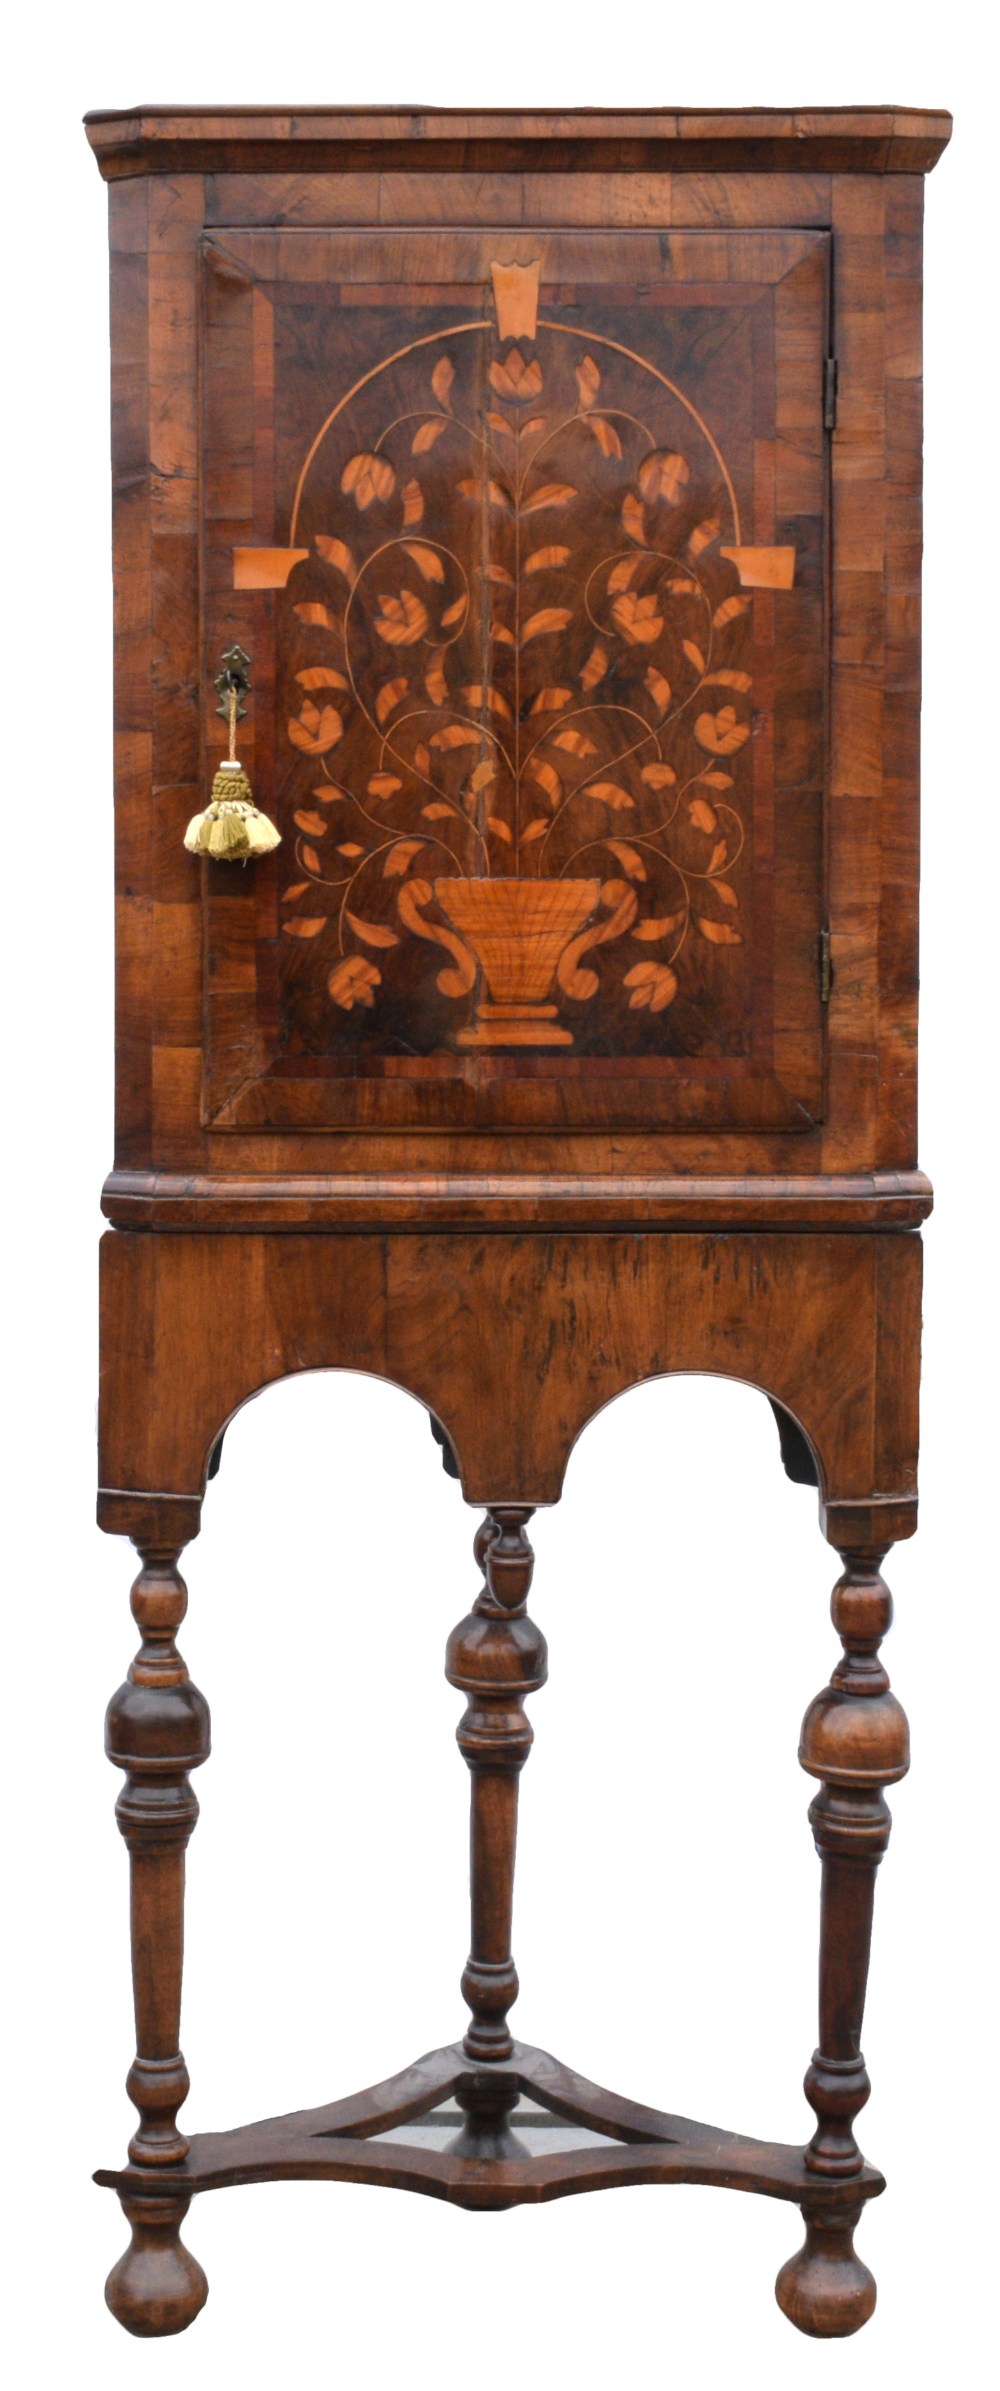 18th Century Dutch mahogany and marquetry inlaid corner cabinet with a single cupboard door on later